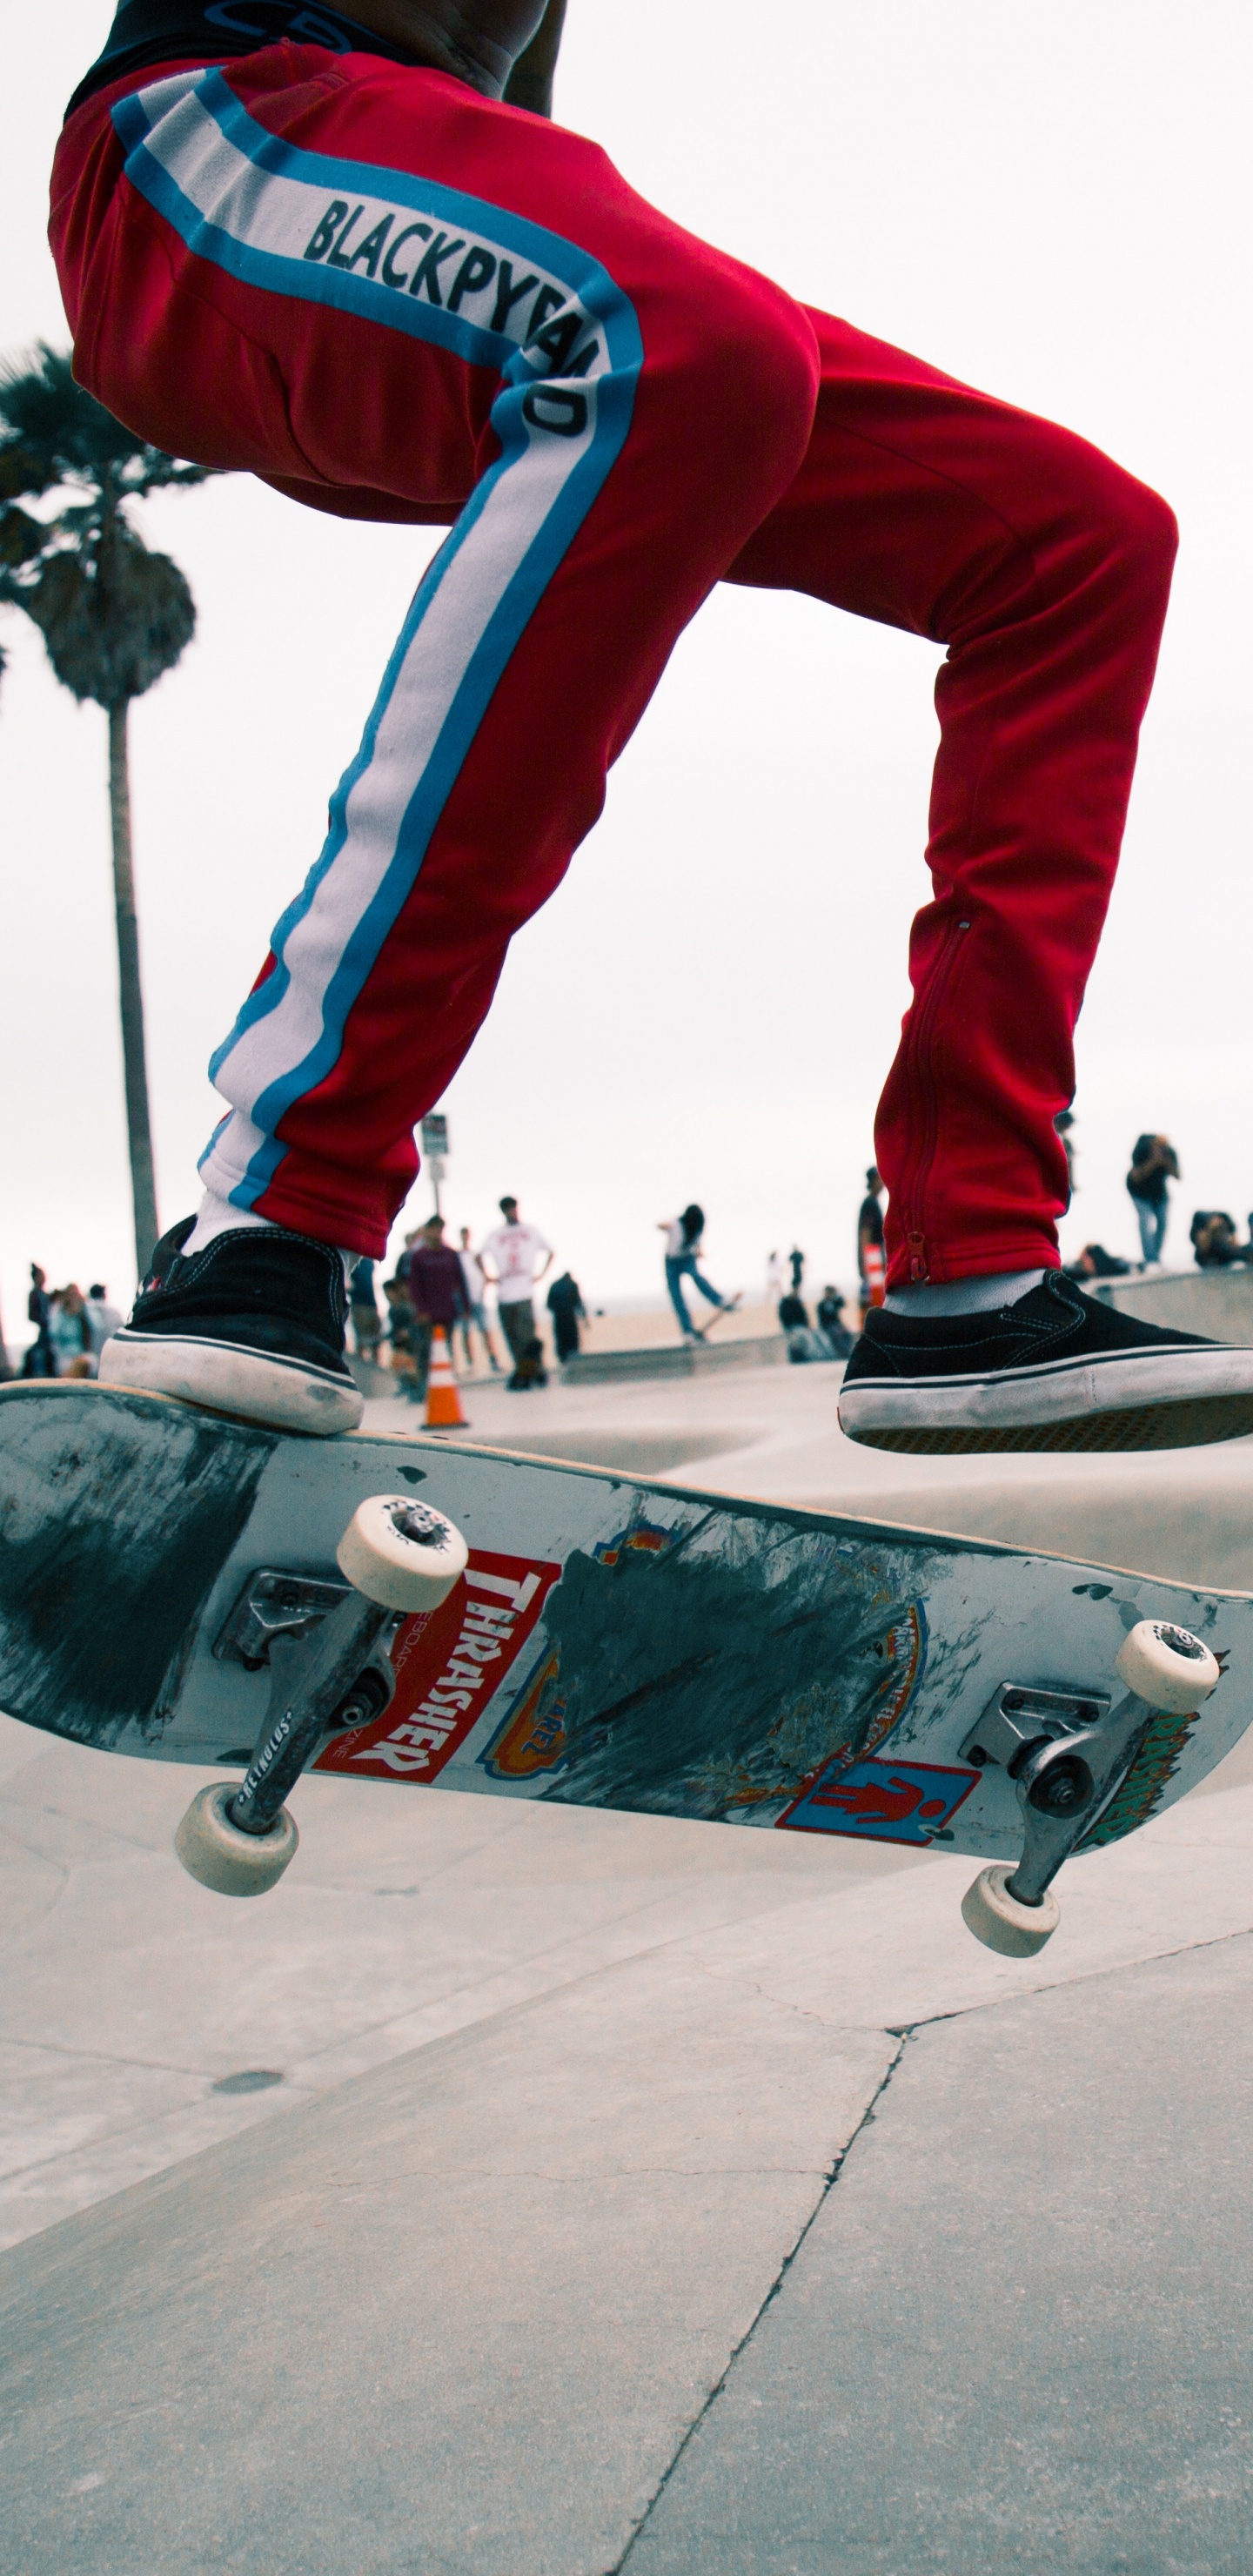 Man in Red Pants and Black and White Sneakers Riding Skateboard. Wallpaper in 1440x2960 Resolution